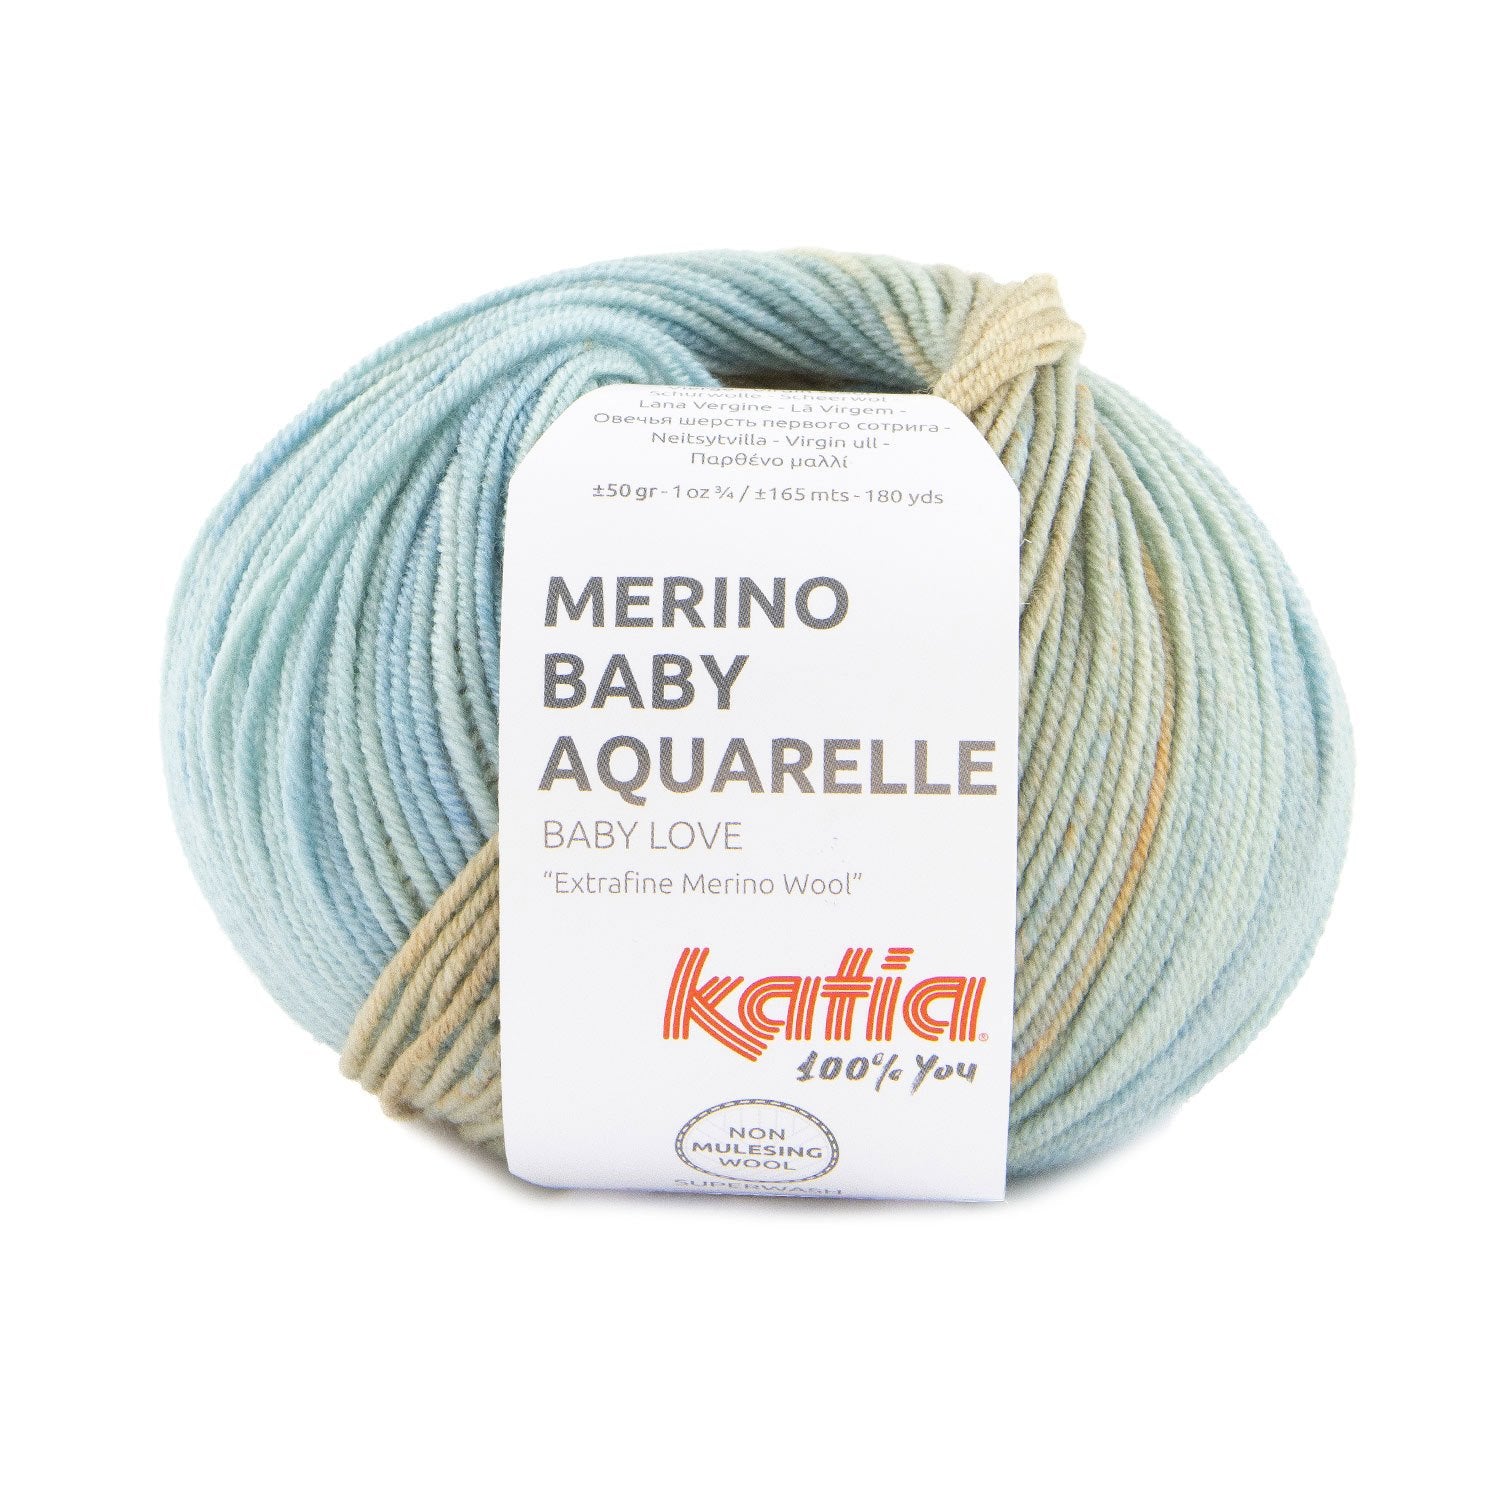 Merino Baby Aquarelle degradé wool in 3 colors for babies by Katia - Soft and durable